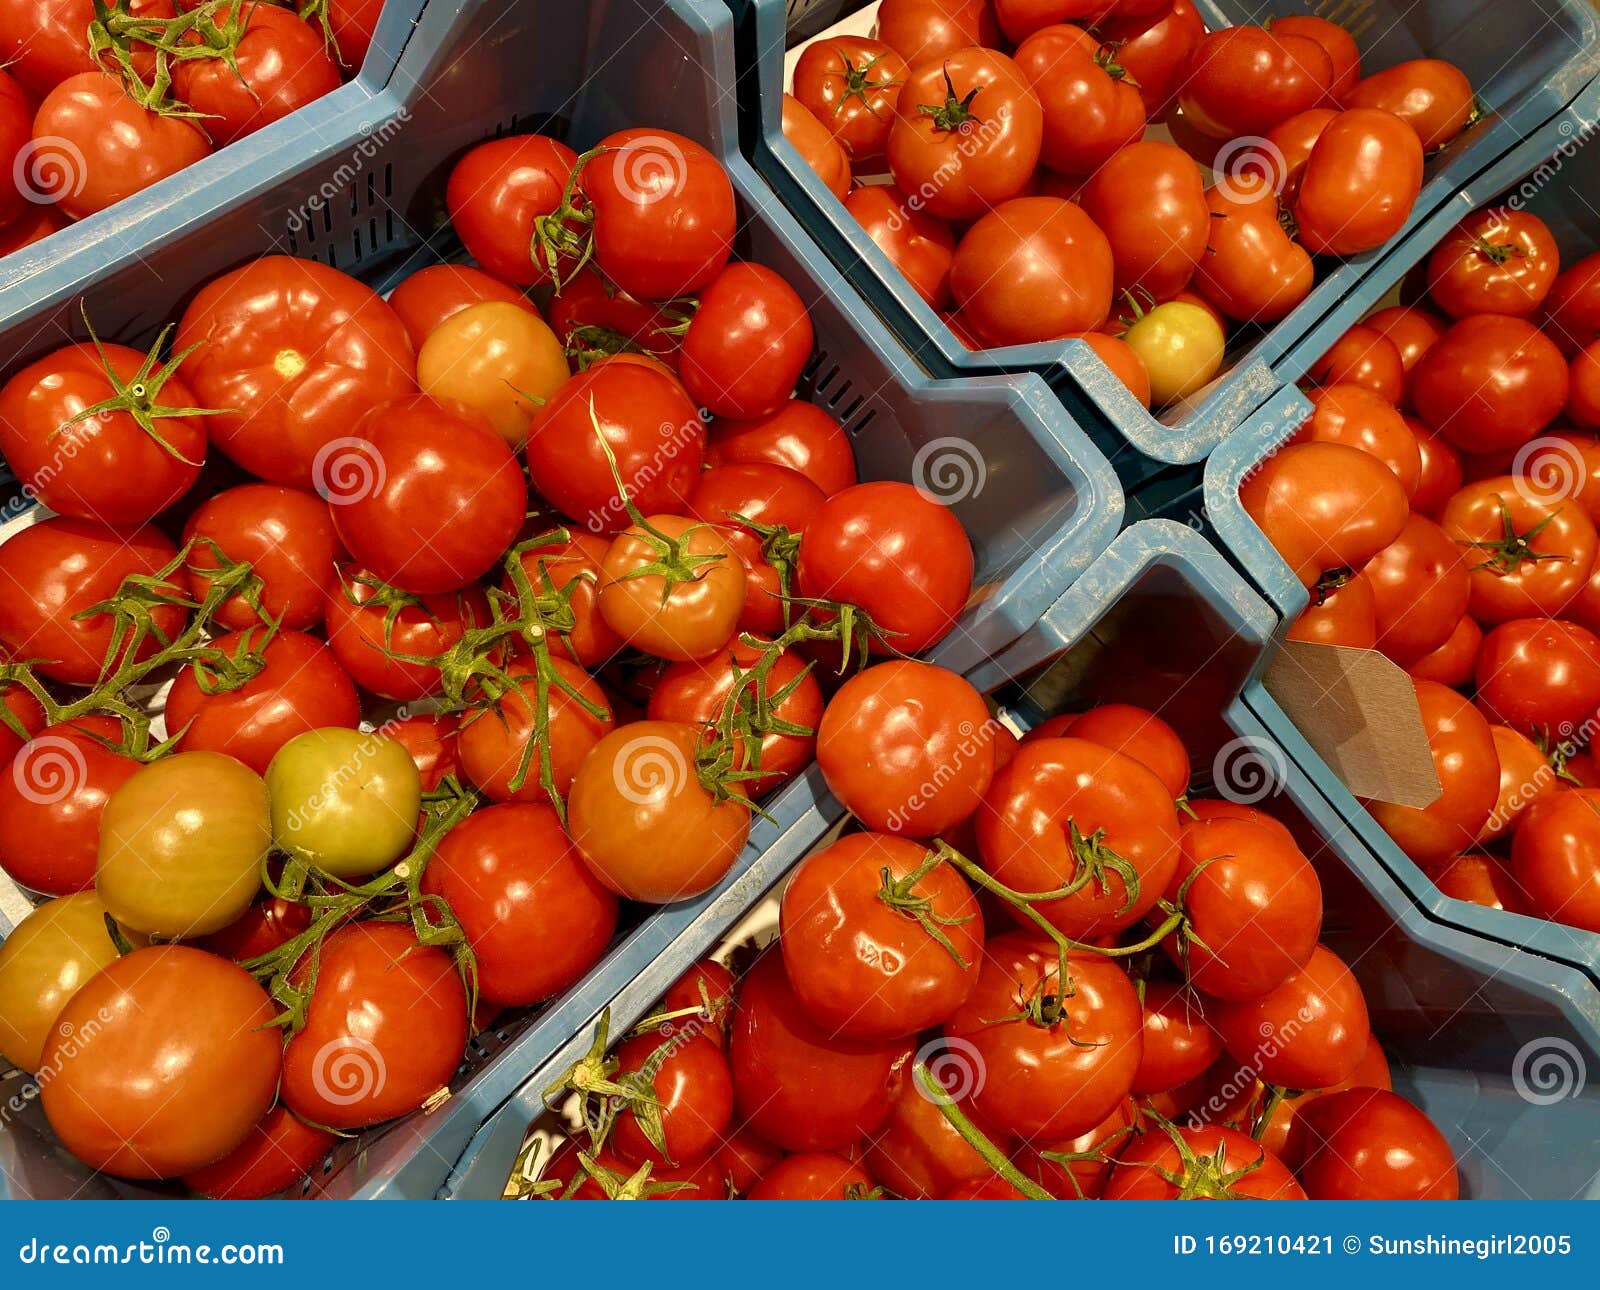 Fresh Tomatoes for Sale in the Supermarket Stock Image - Image of fresh ...